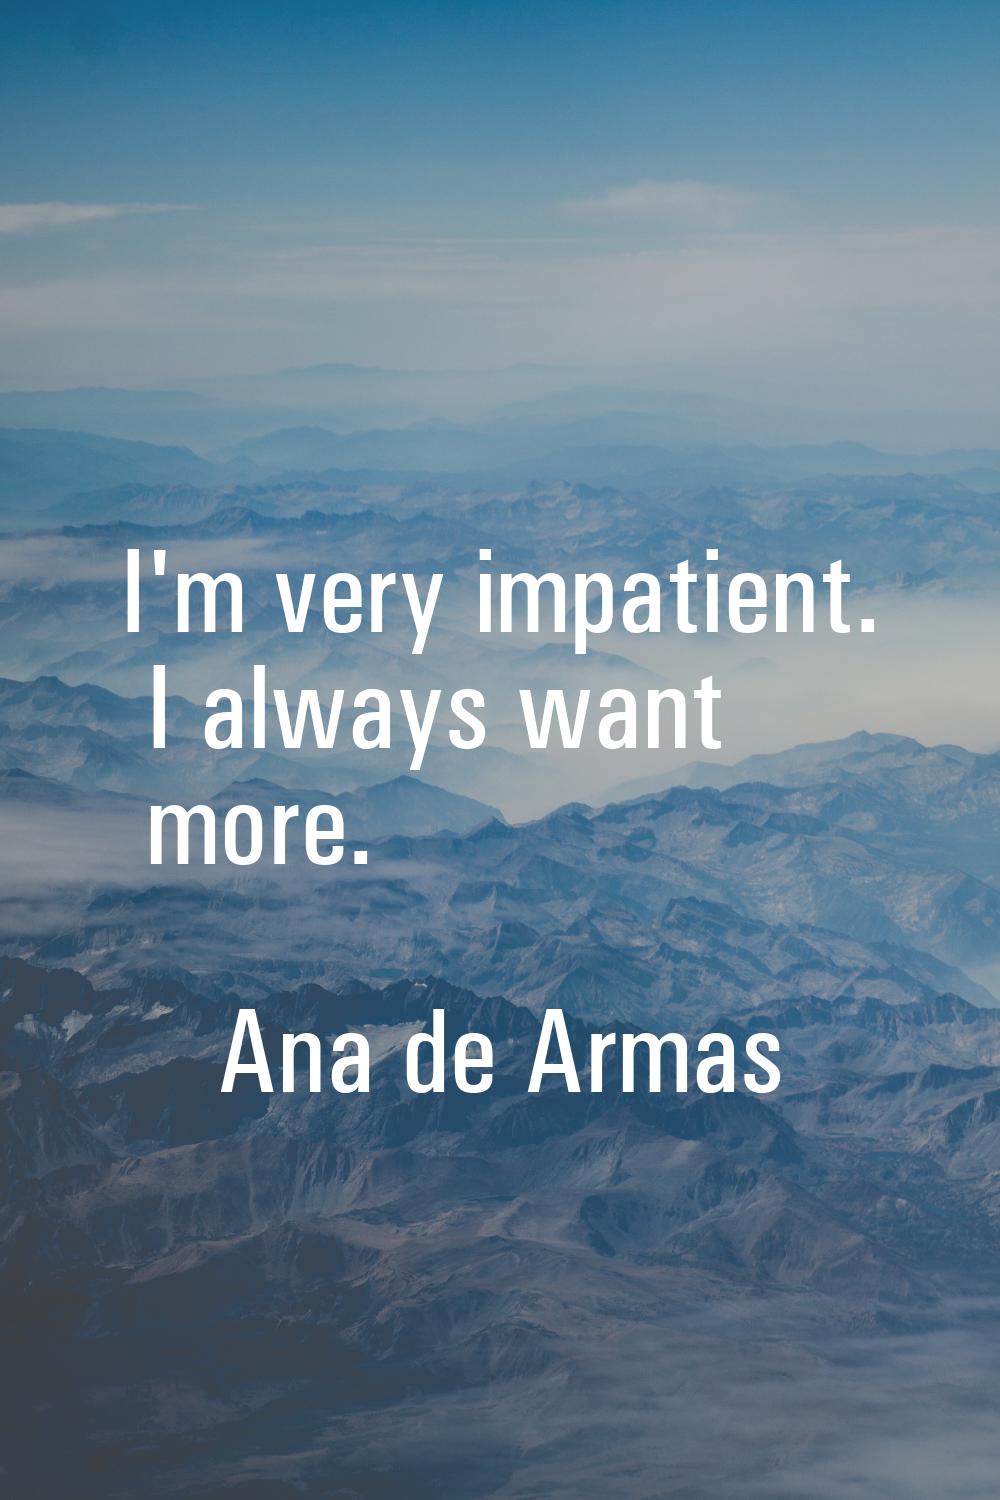 I'm very impatient. I always want more.